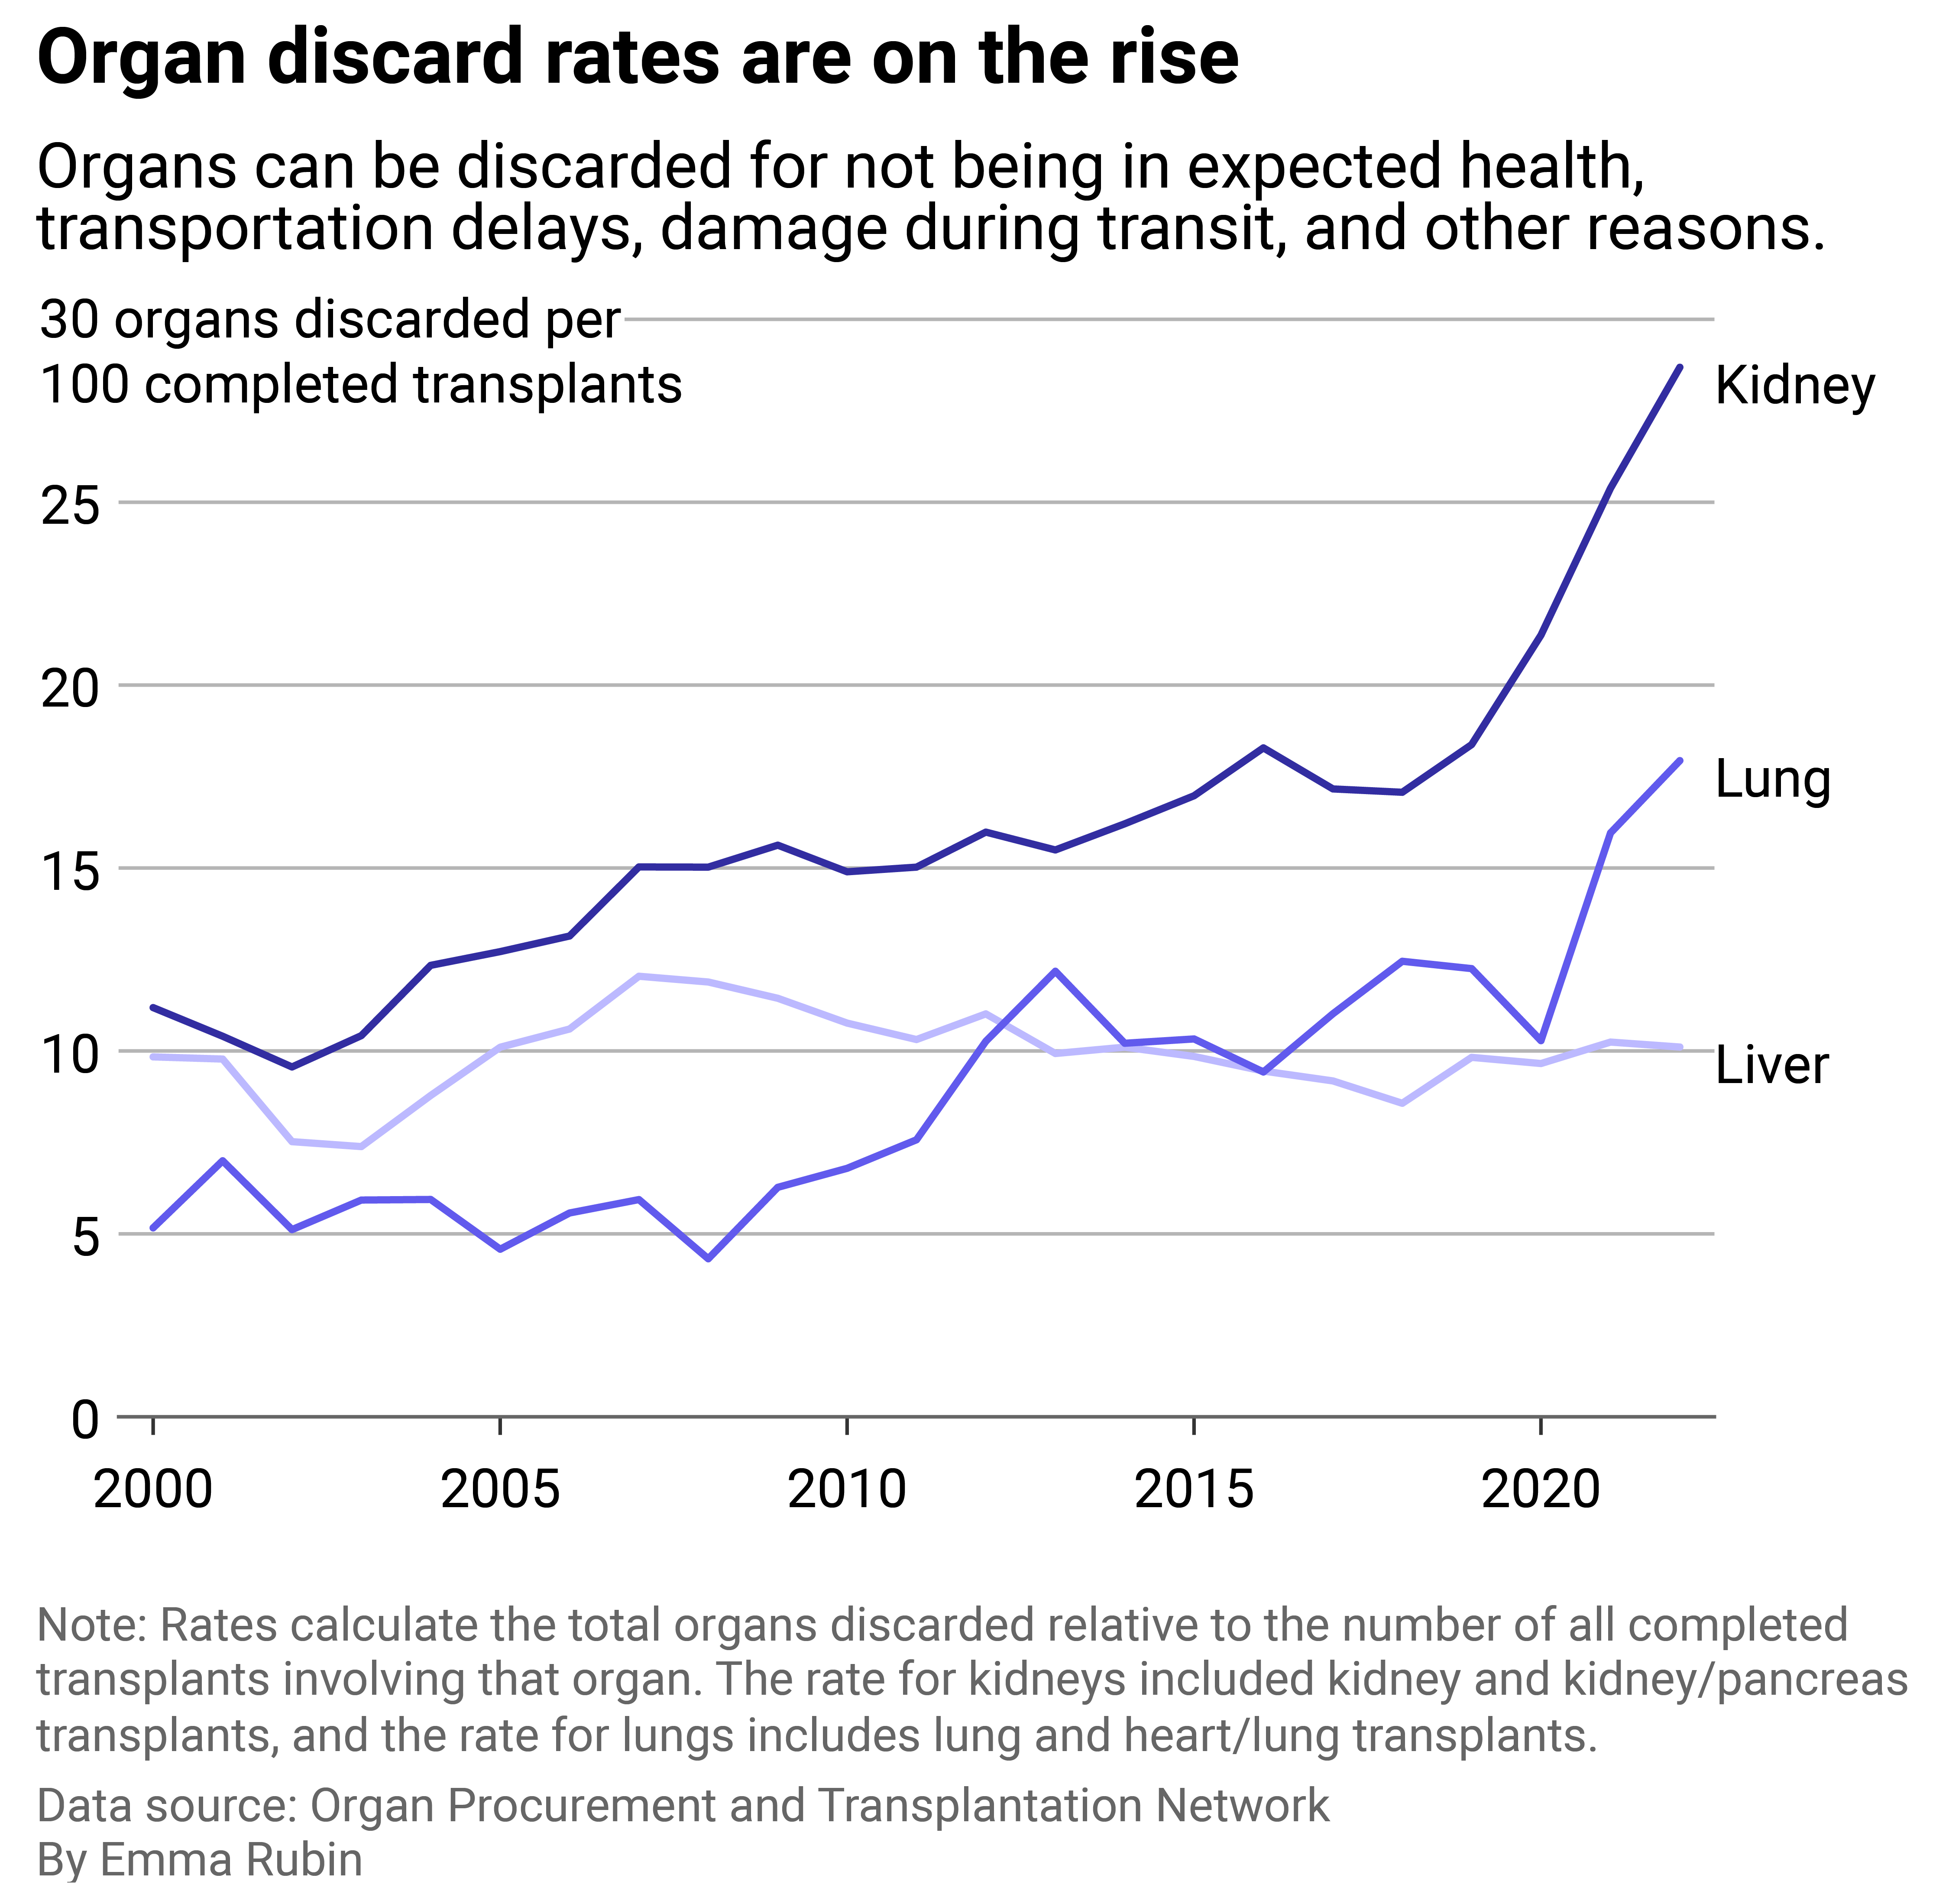 Line chart showing organ discard rates are on the rise. Organs can be discarded for not being in expected health, transportation delays, and sometimes getting lost in transit.